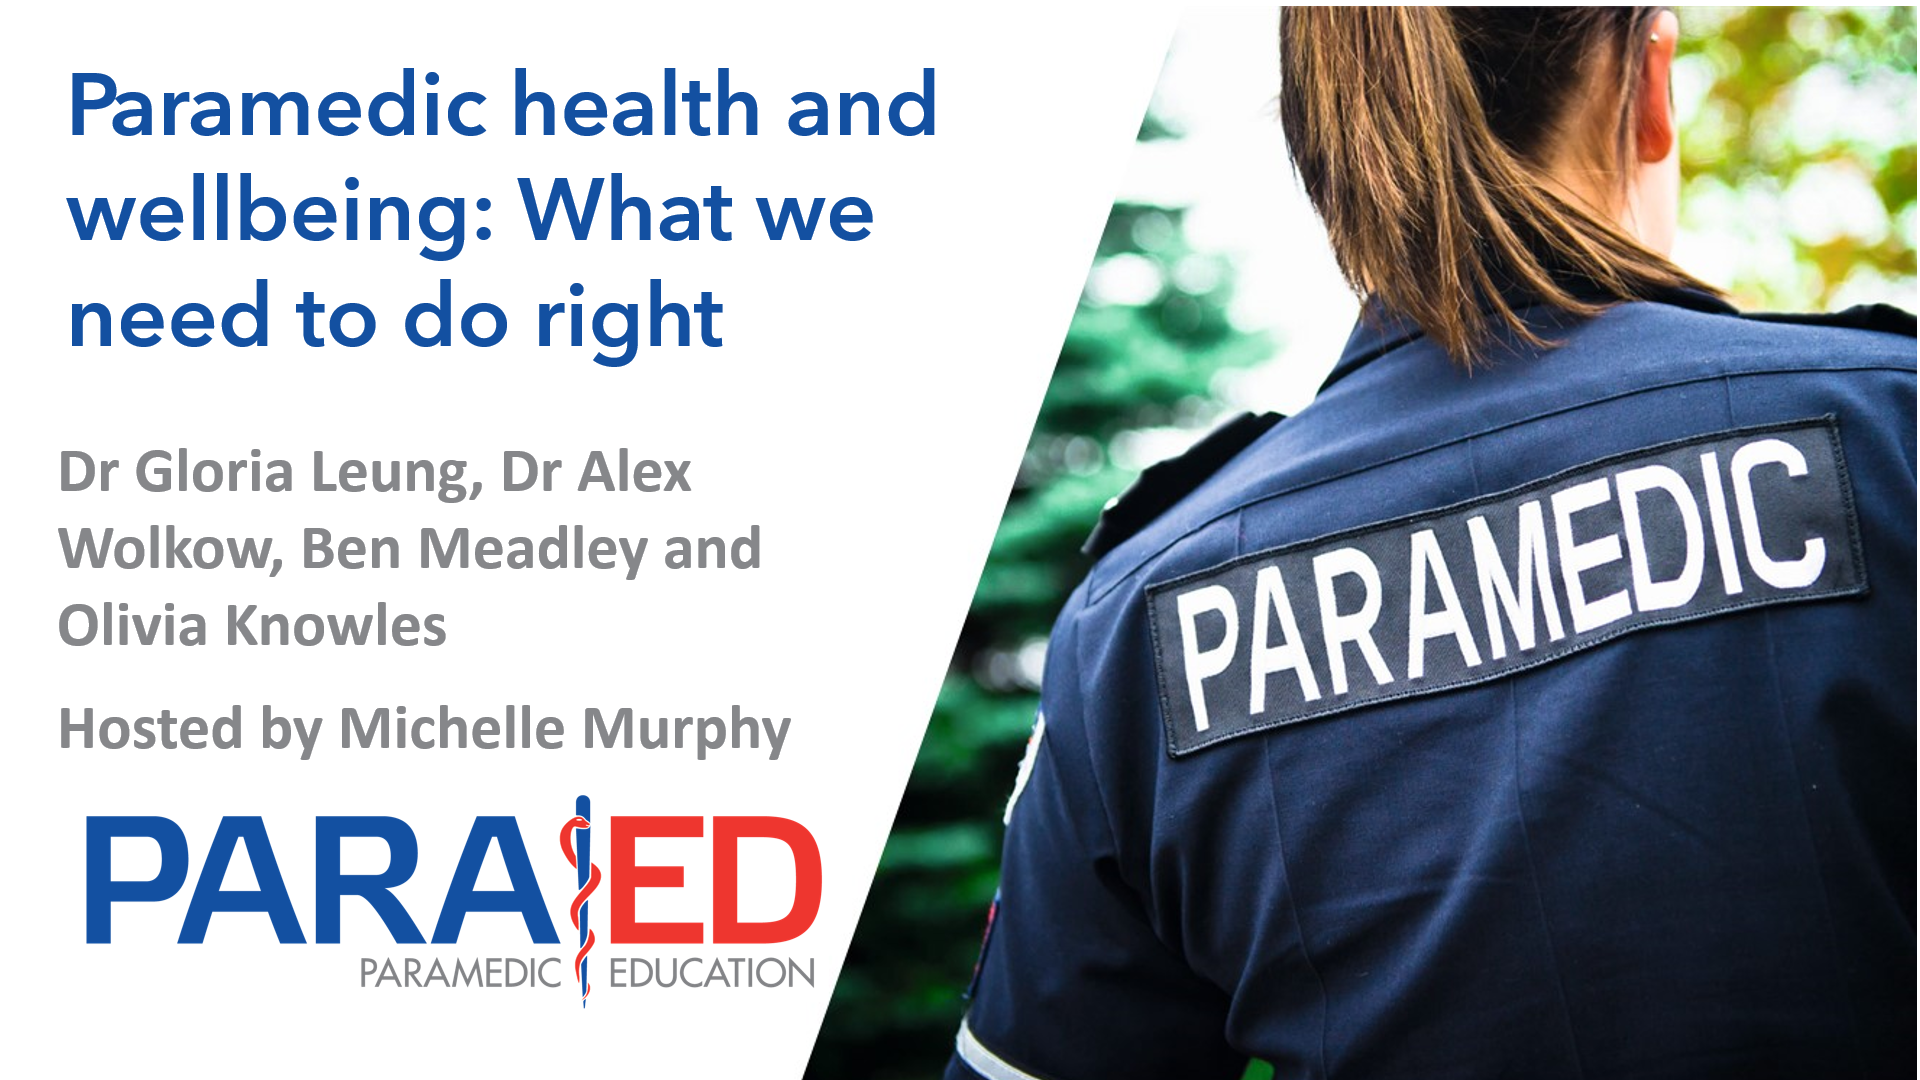 Paramedic health and wellbeing: What we need to do right